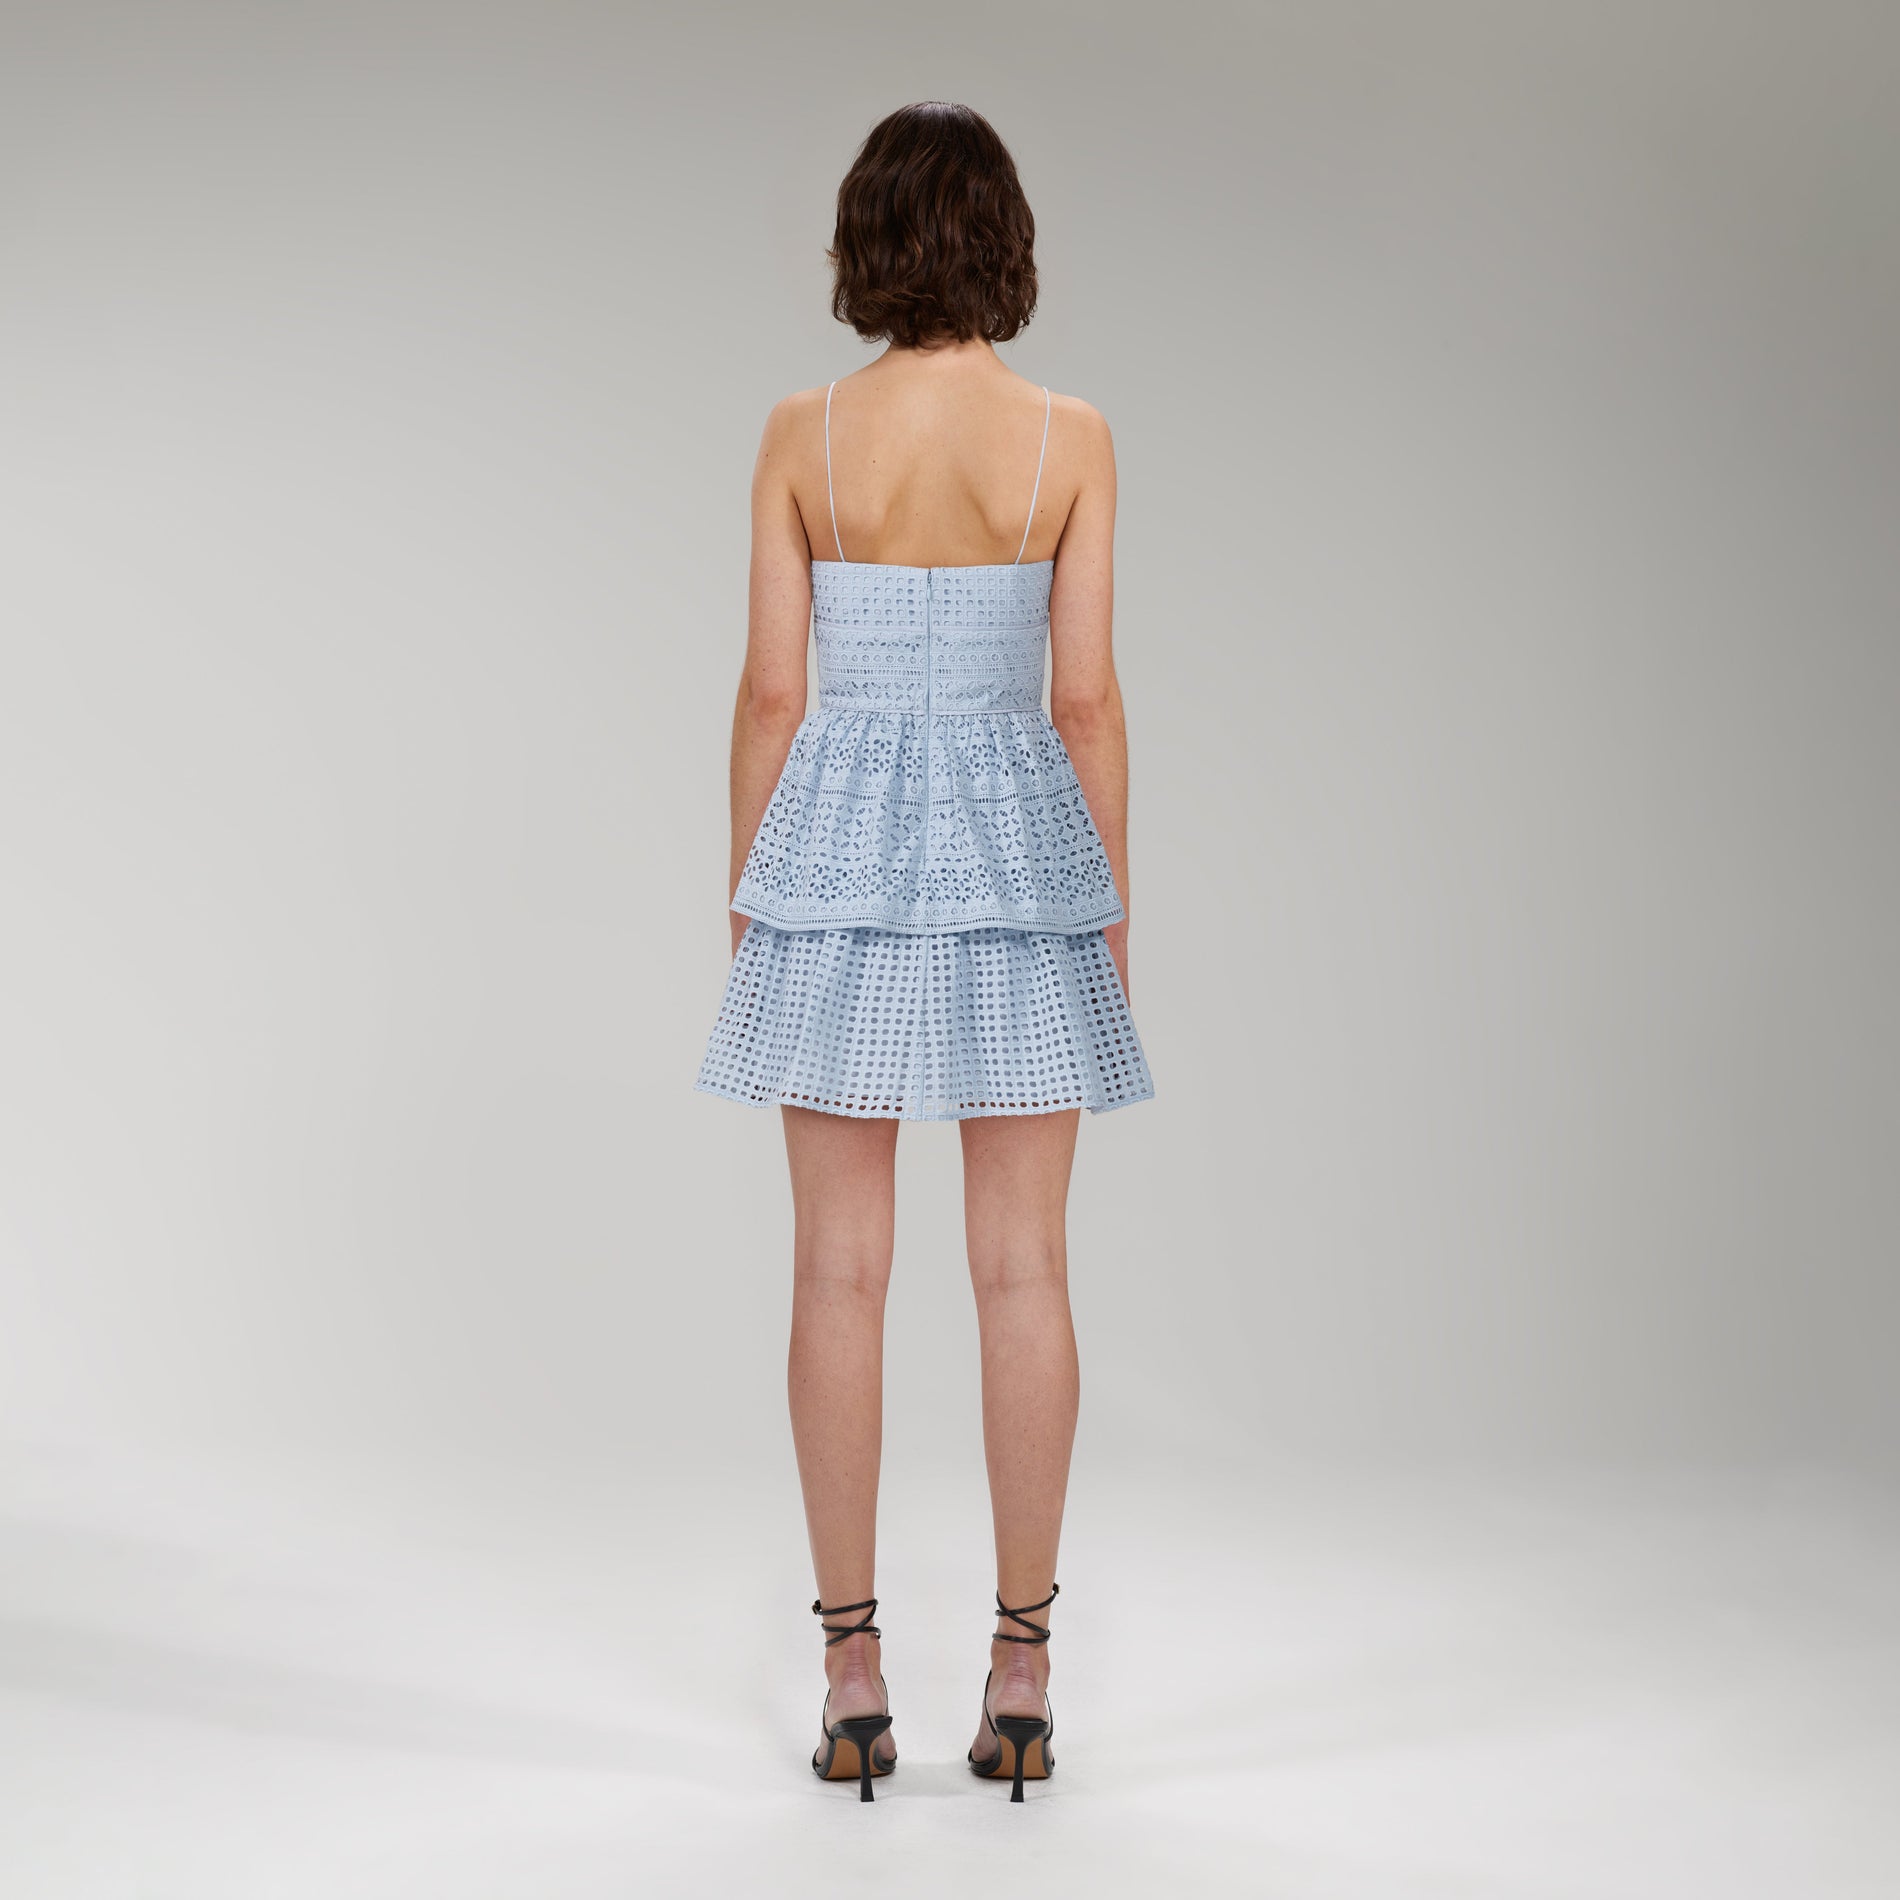 A woman wearing the Light Blue Cotton Broderie Anglaise Mini Dress